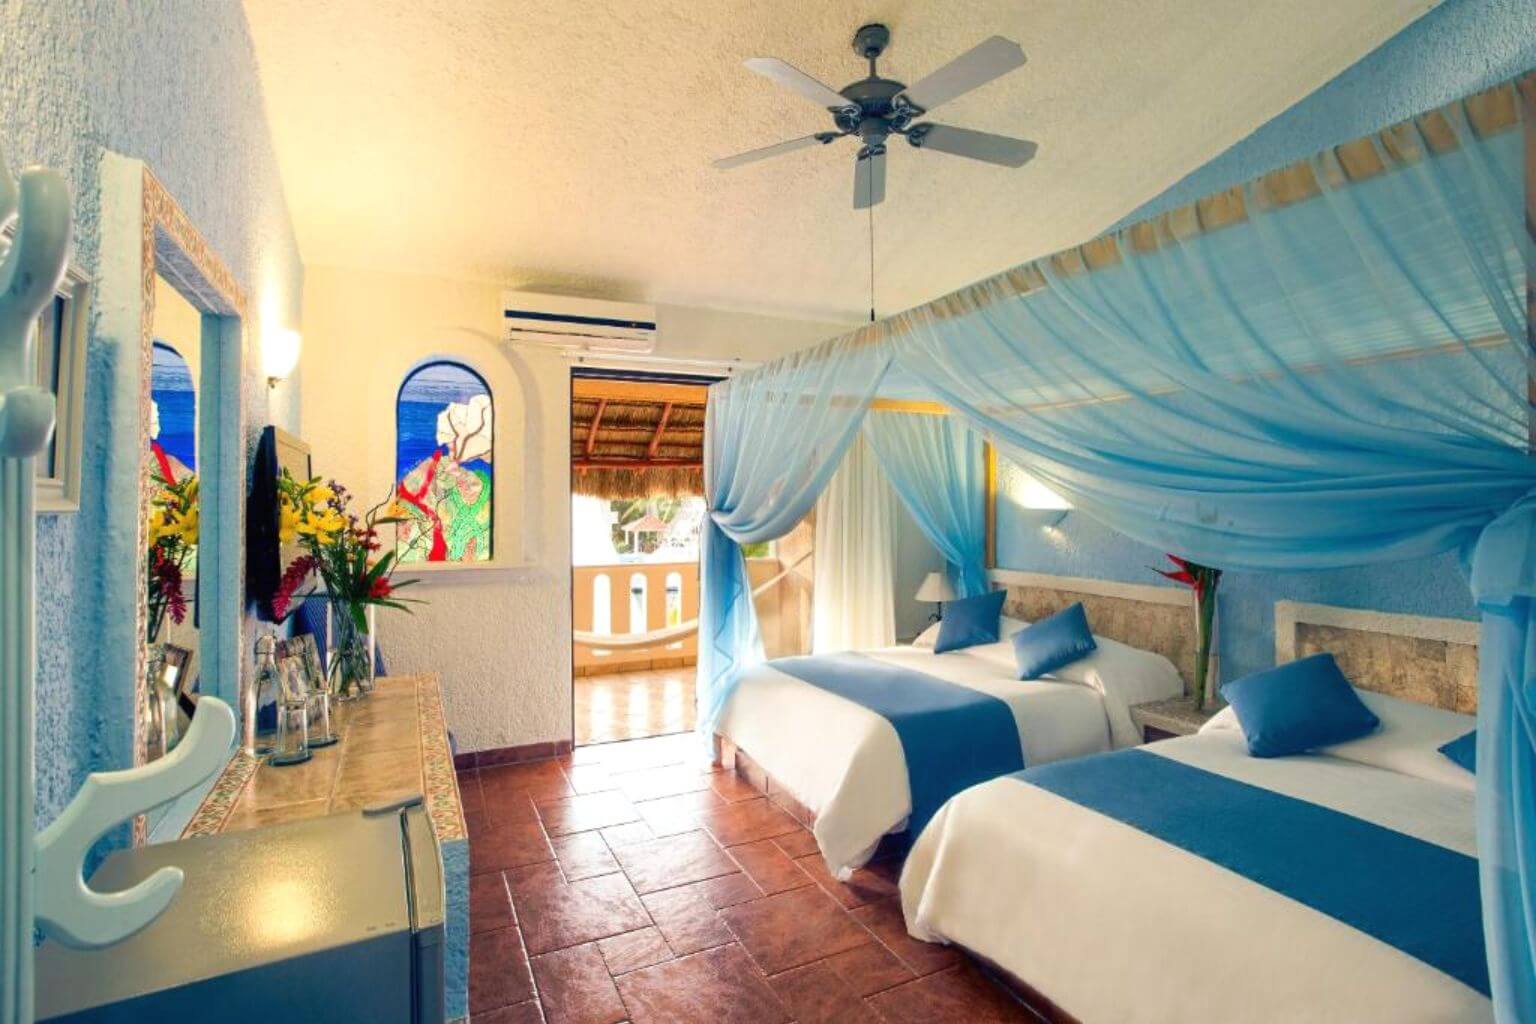 An example of a room inside Chez Waffle Hotel, Puerto Aventuras